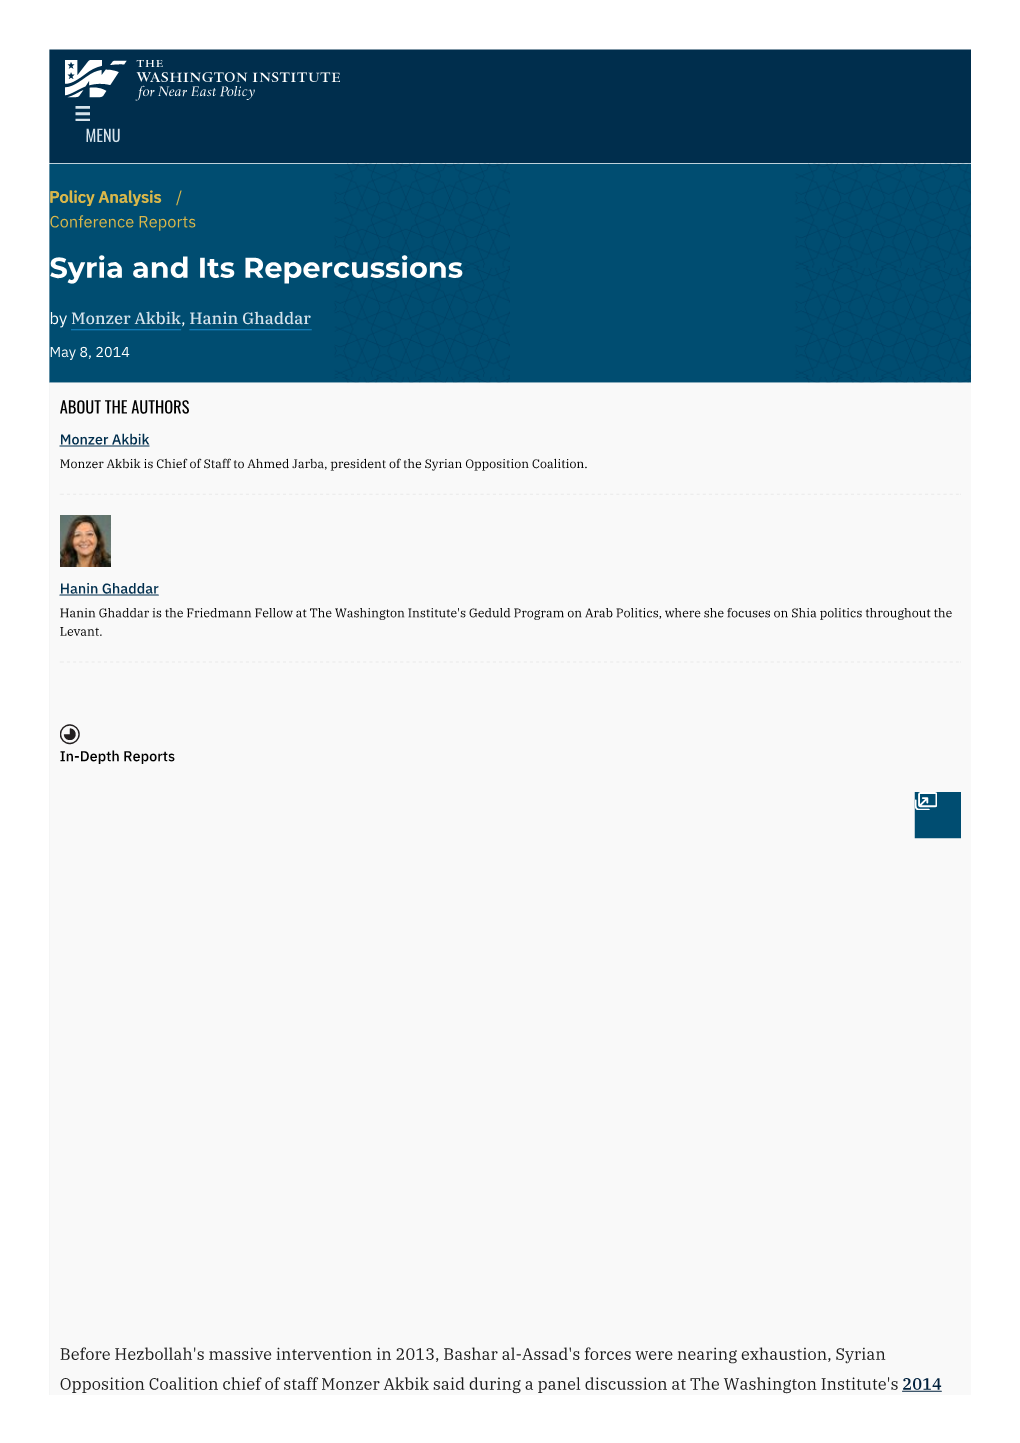 Syria and Its Repercussions | the Washington Institute